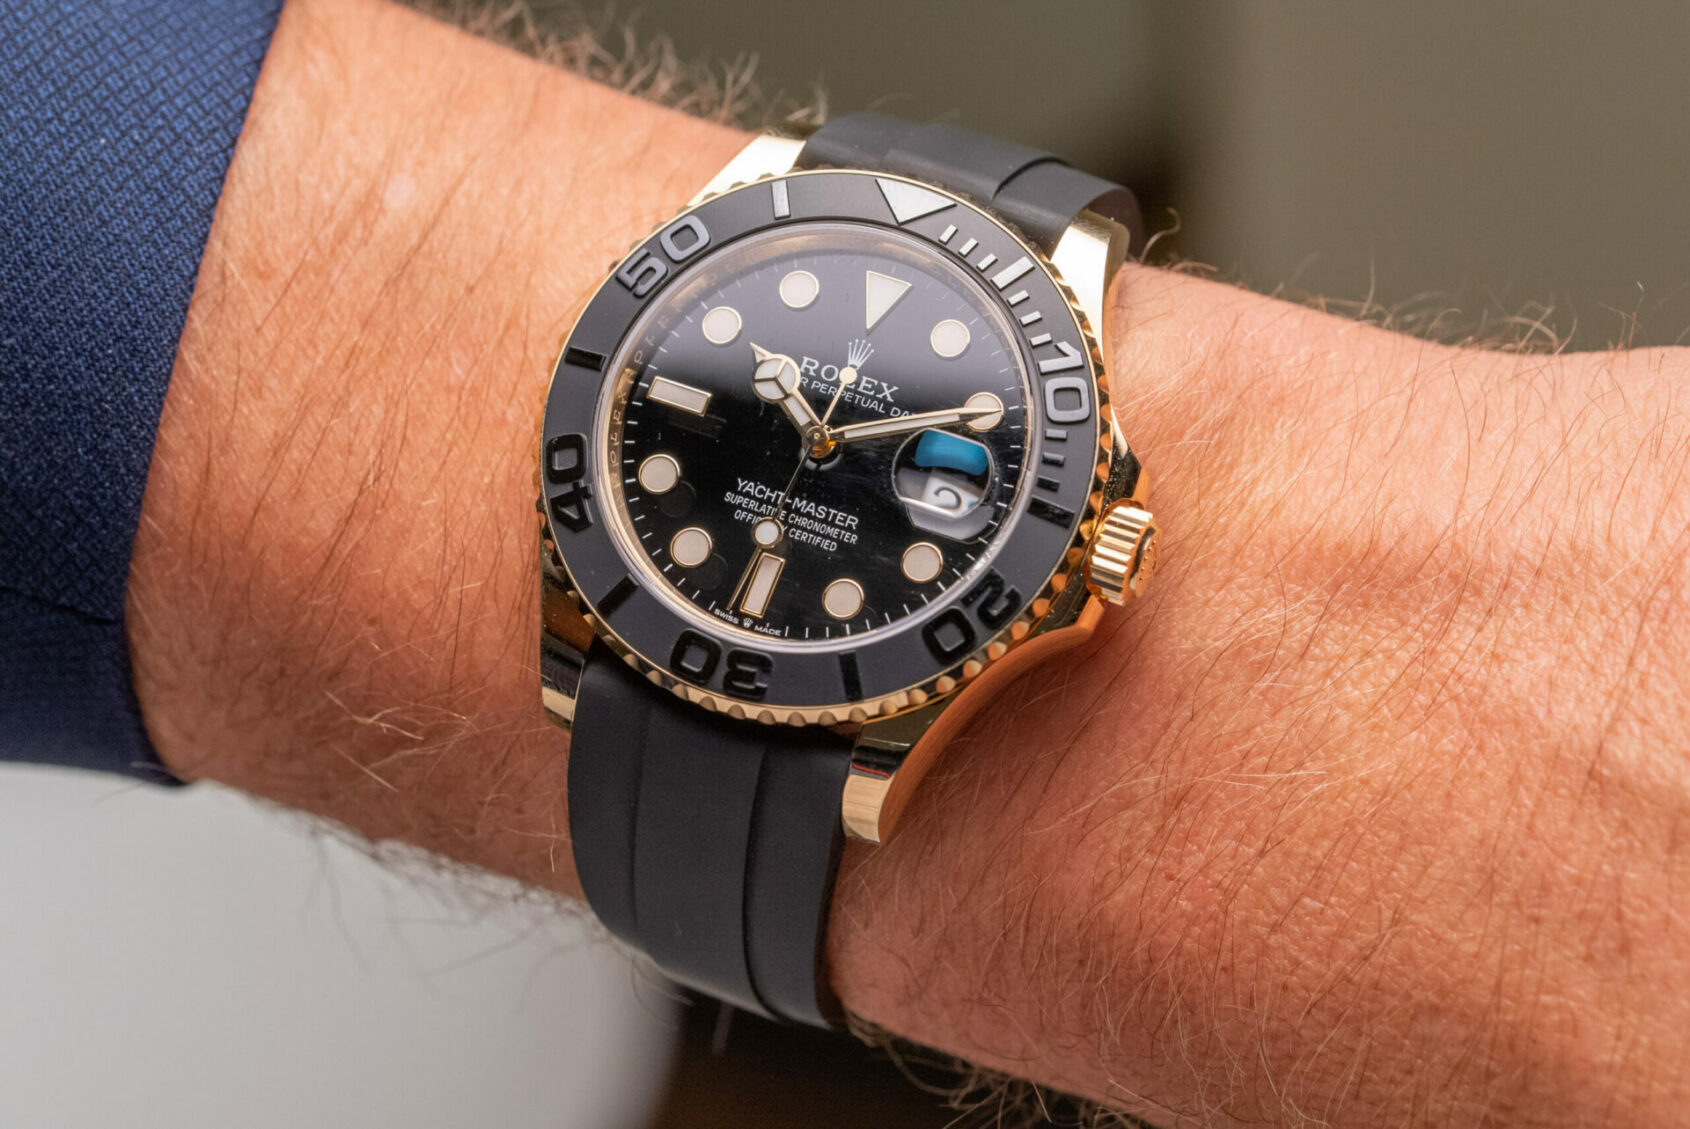 Making the case: The Rolex Yacht-Master is the most versatile collection of all their ‘Professional’ models